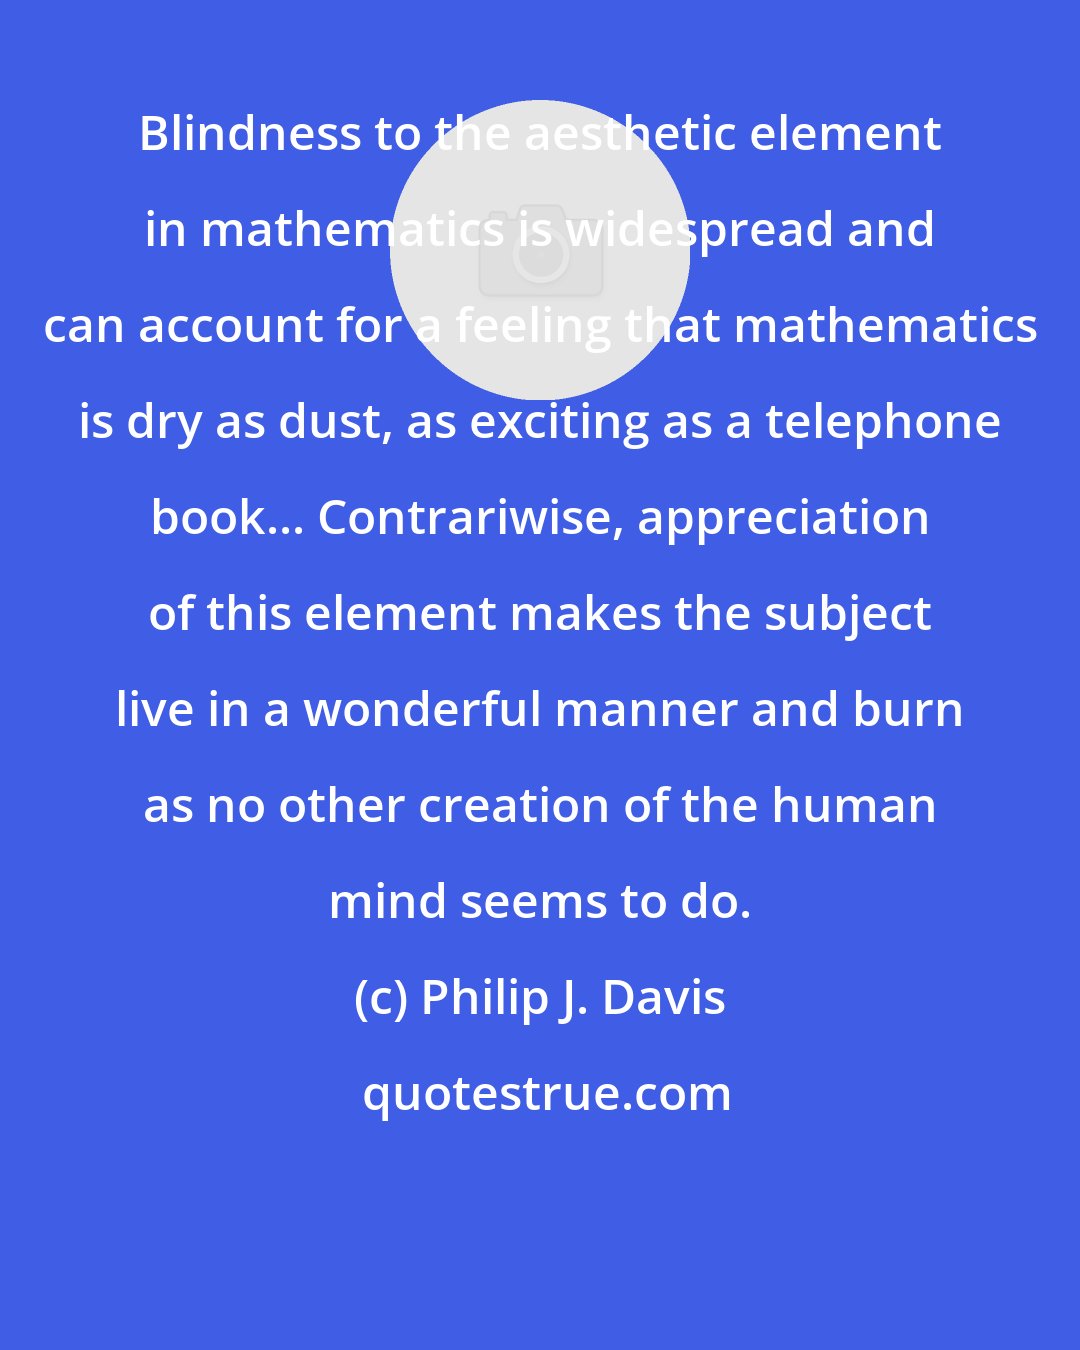 Philip J. Davis: Blindness to the aesthetic element in mathematics is widespread and can account for a feeling that mathematics is dry as dust, as exciting as a telephone book... Contrariwise, appreciation of this element makes the subject live in a wonderful manner and burn as no other creation of the human mind seems to do.